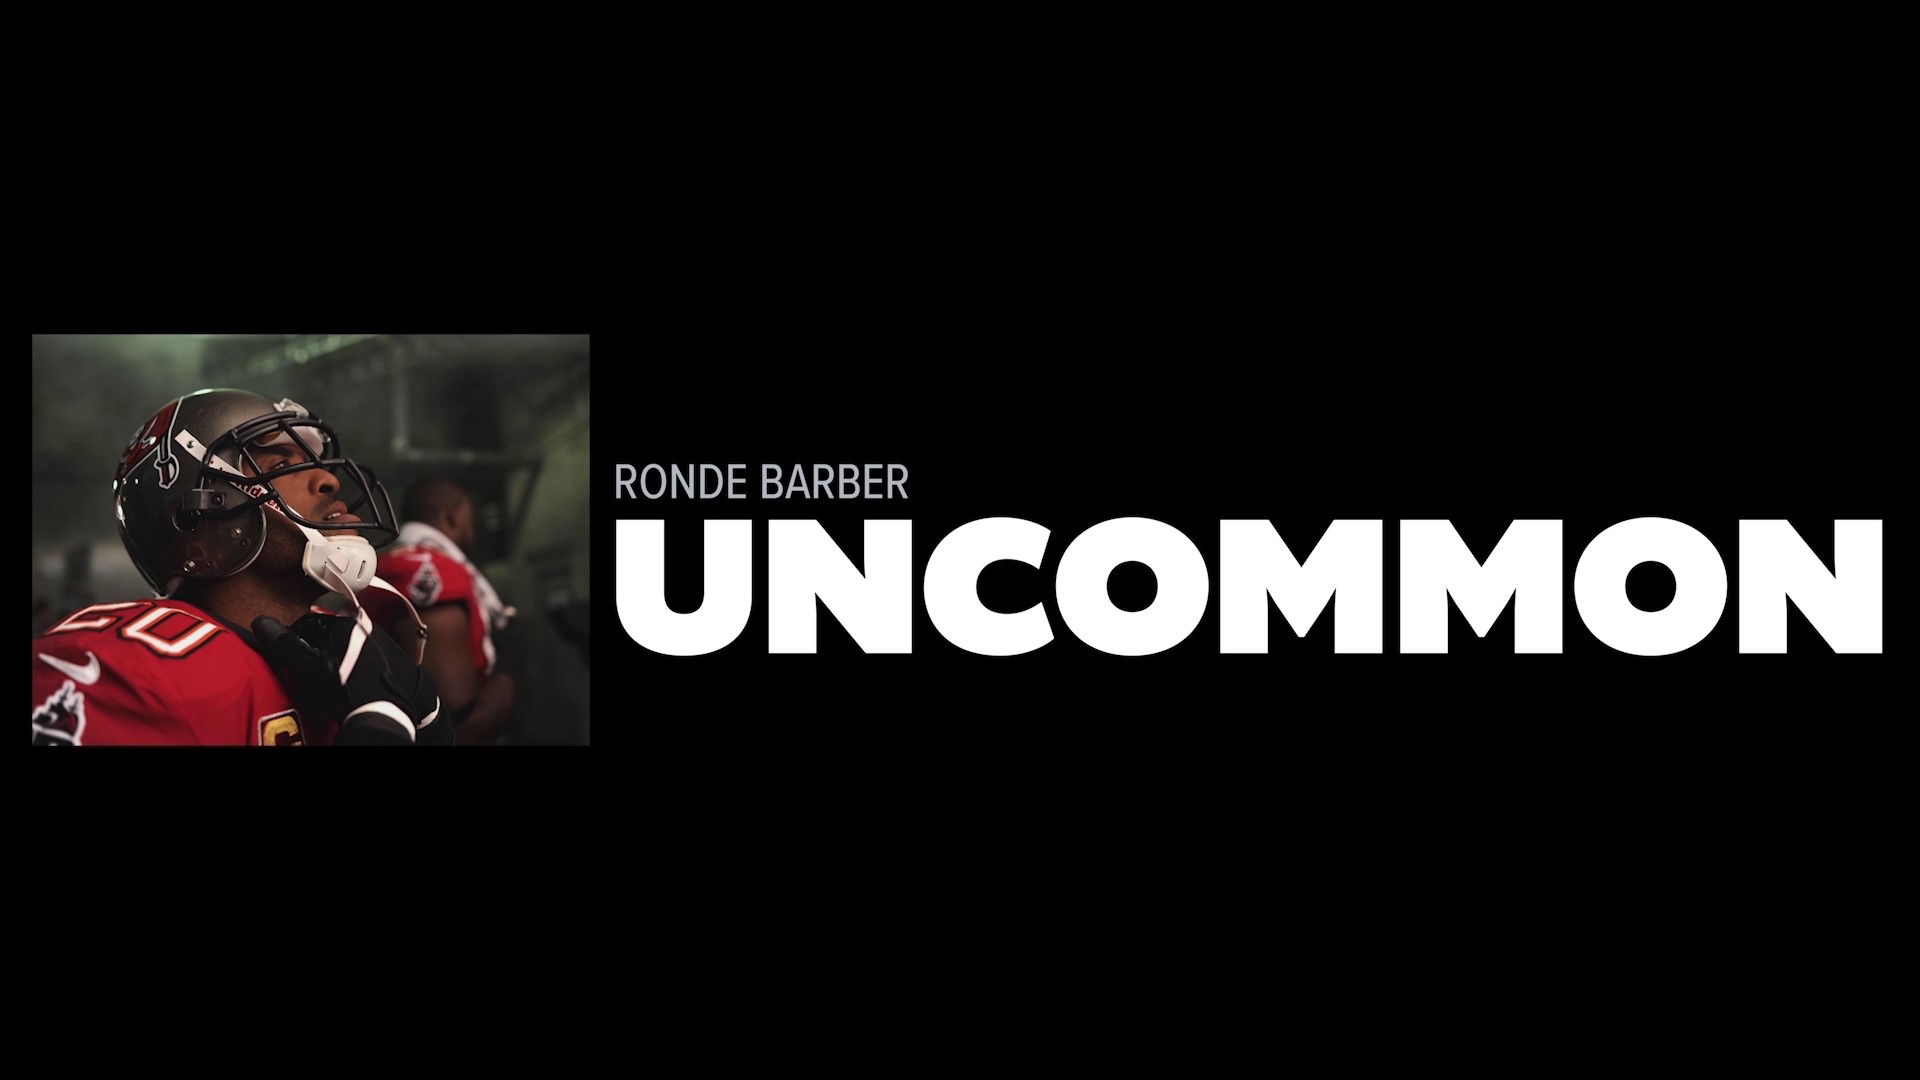 "Uncommon" chronicles Tampa Bay Buccaneers' star Rondé Barber's journey to Canton with never-before-seen interviews.